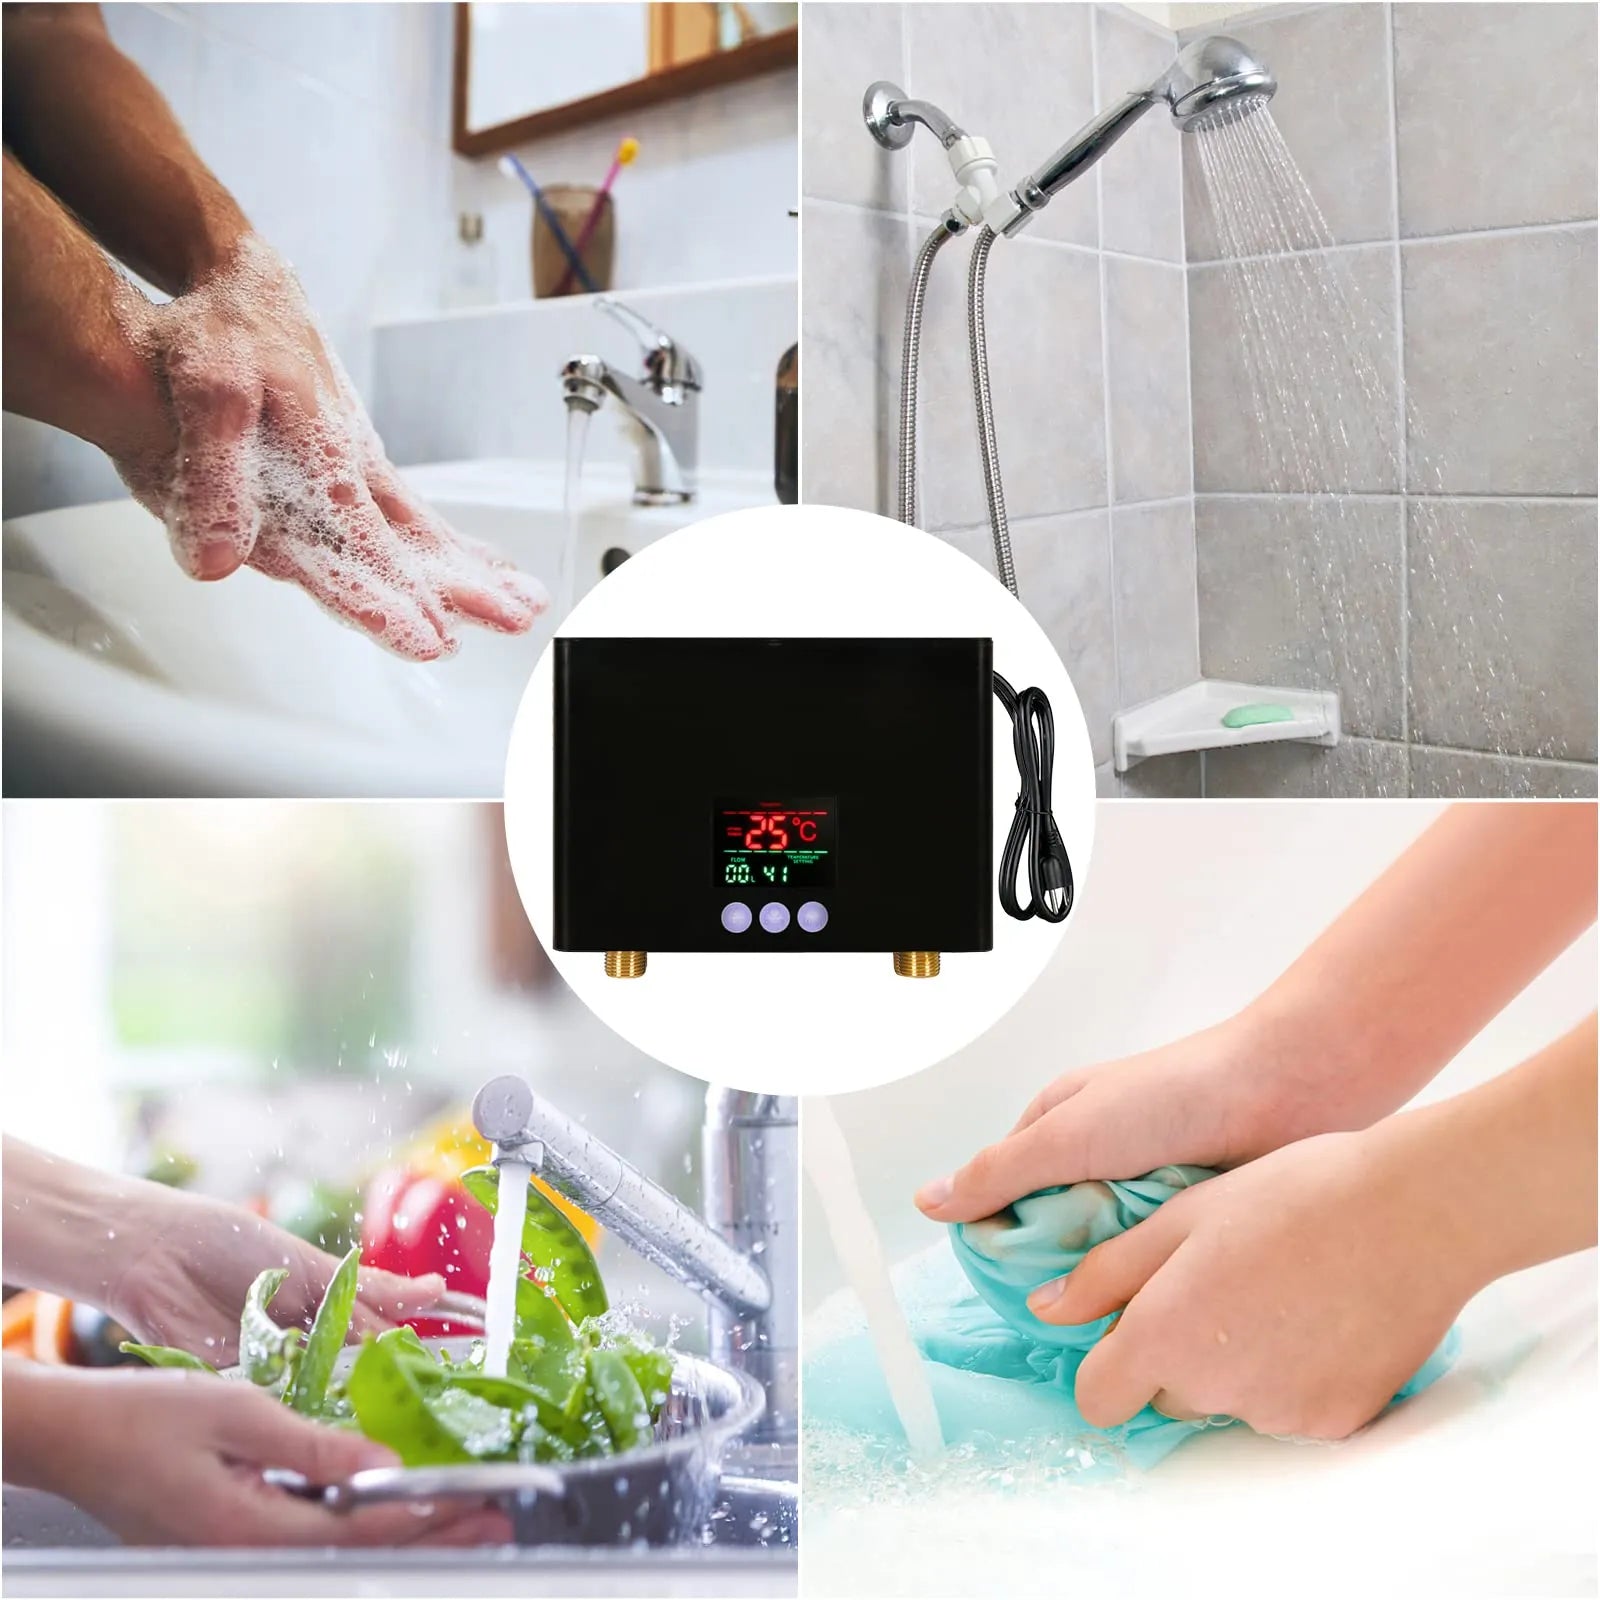 3000W Instant Electric Hot Water Heater Thermostatic Washing Heating with Remote Control LED Display for Home Kitchen Bathroom